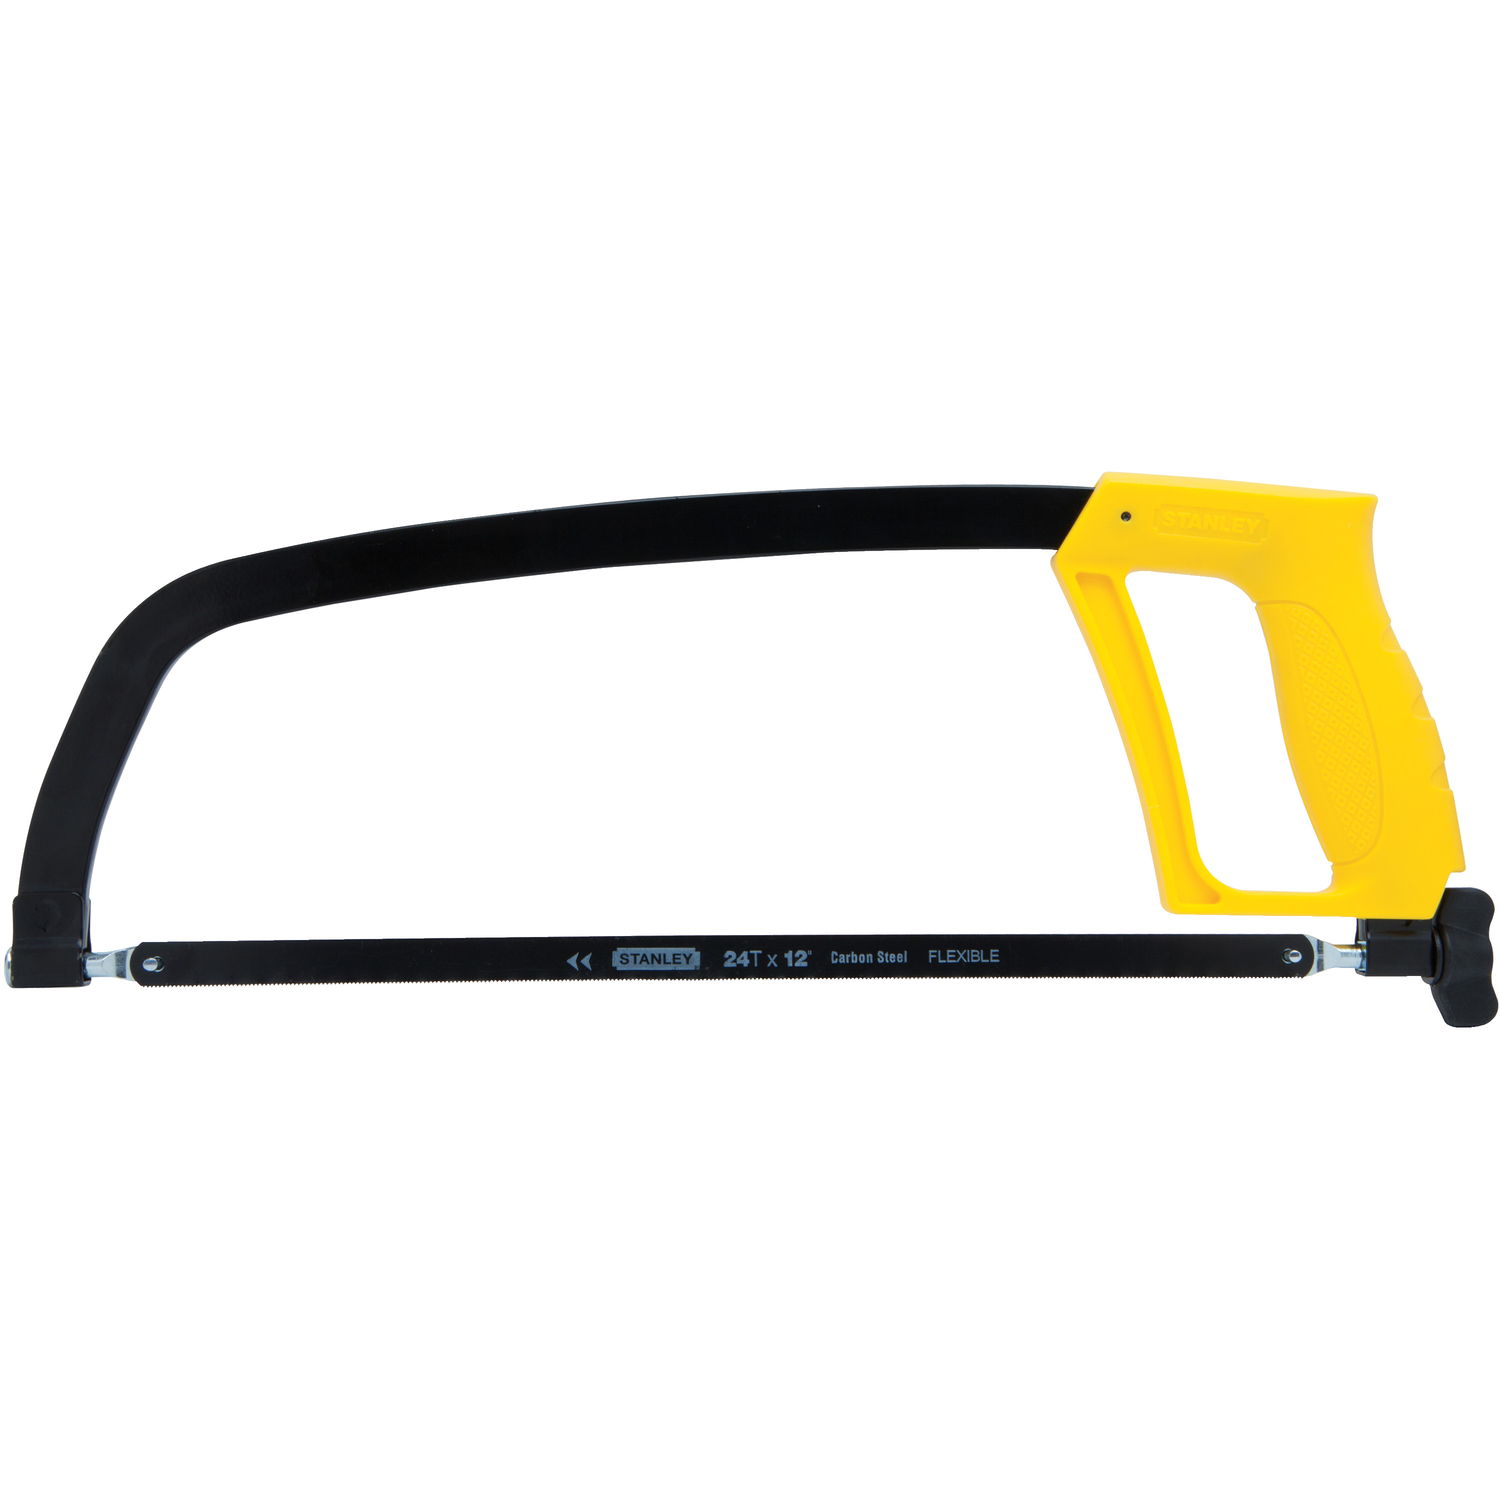 Stanley 12 in. Carbon Steel Hacksaw Black/Yellow 1 pc